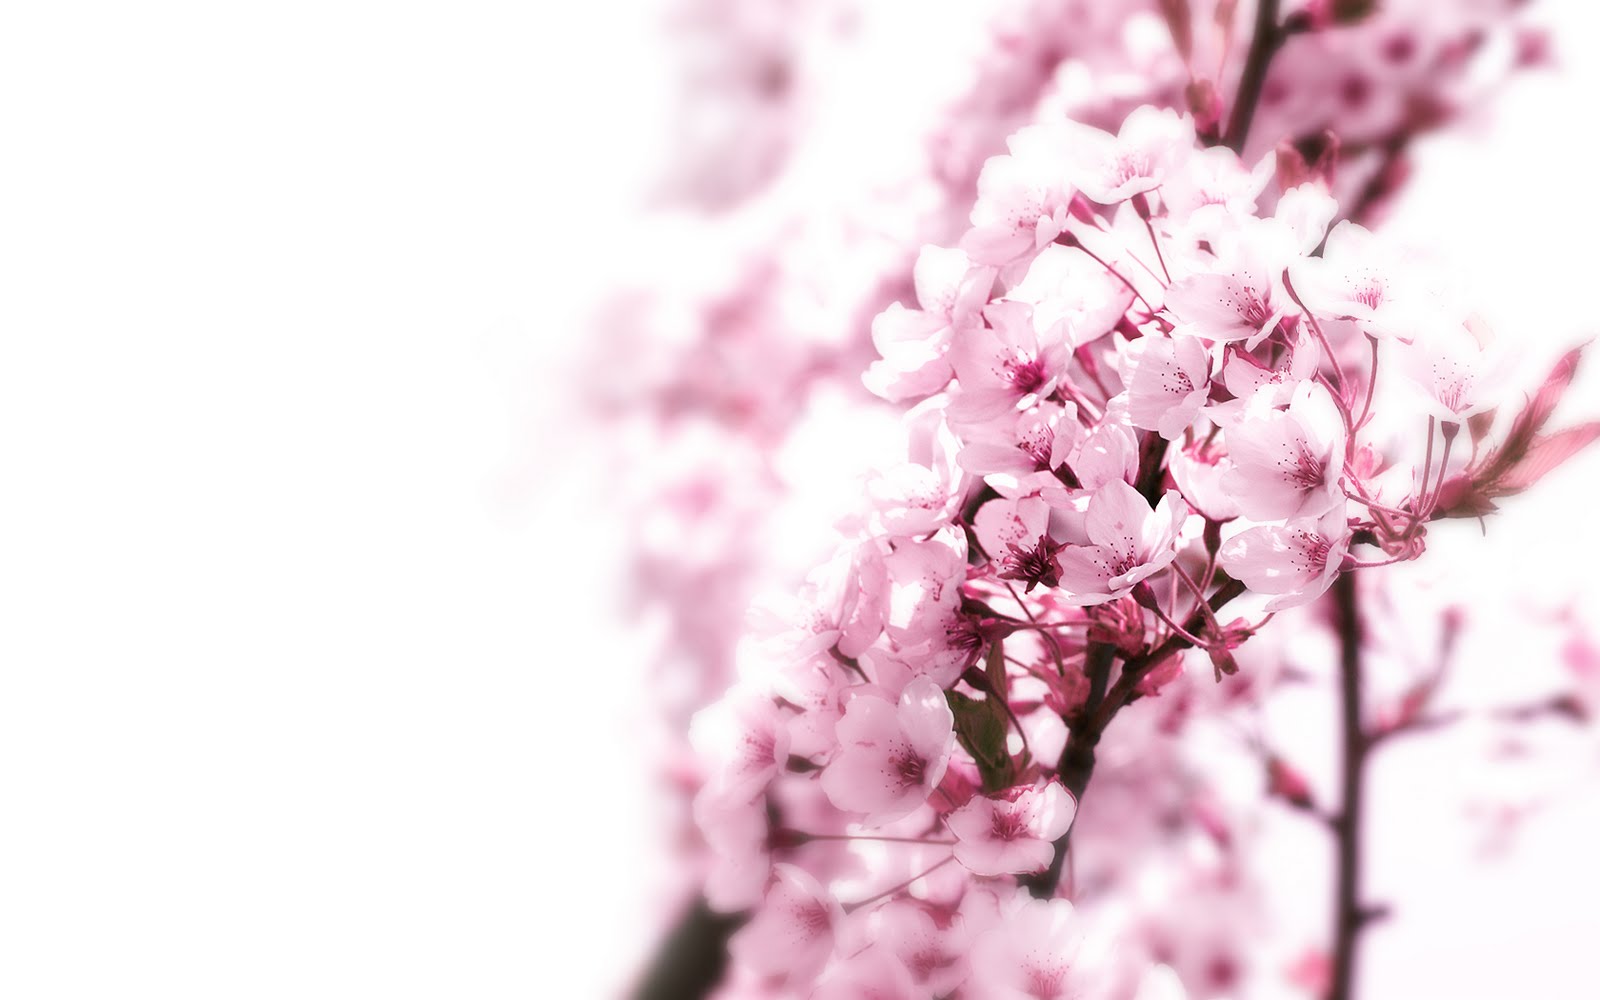 Awesome Wallpapers: Pink Cherry Blossom